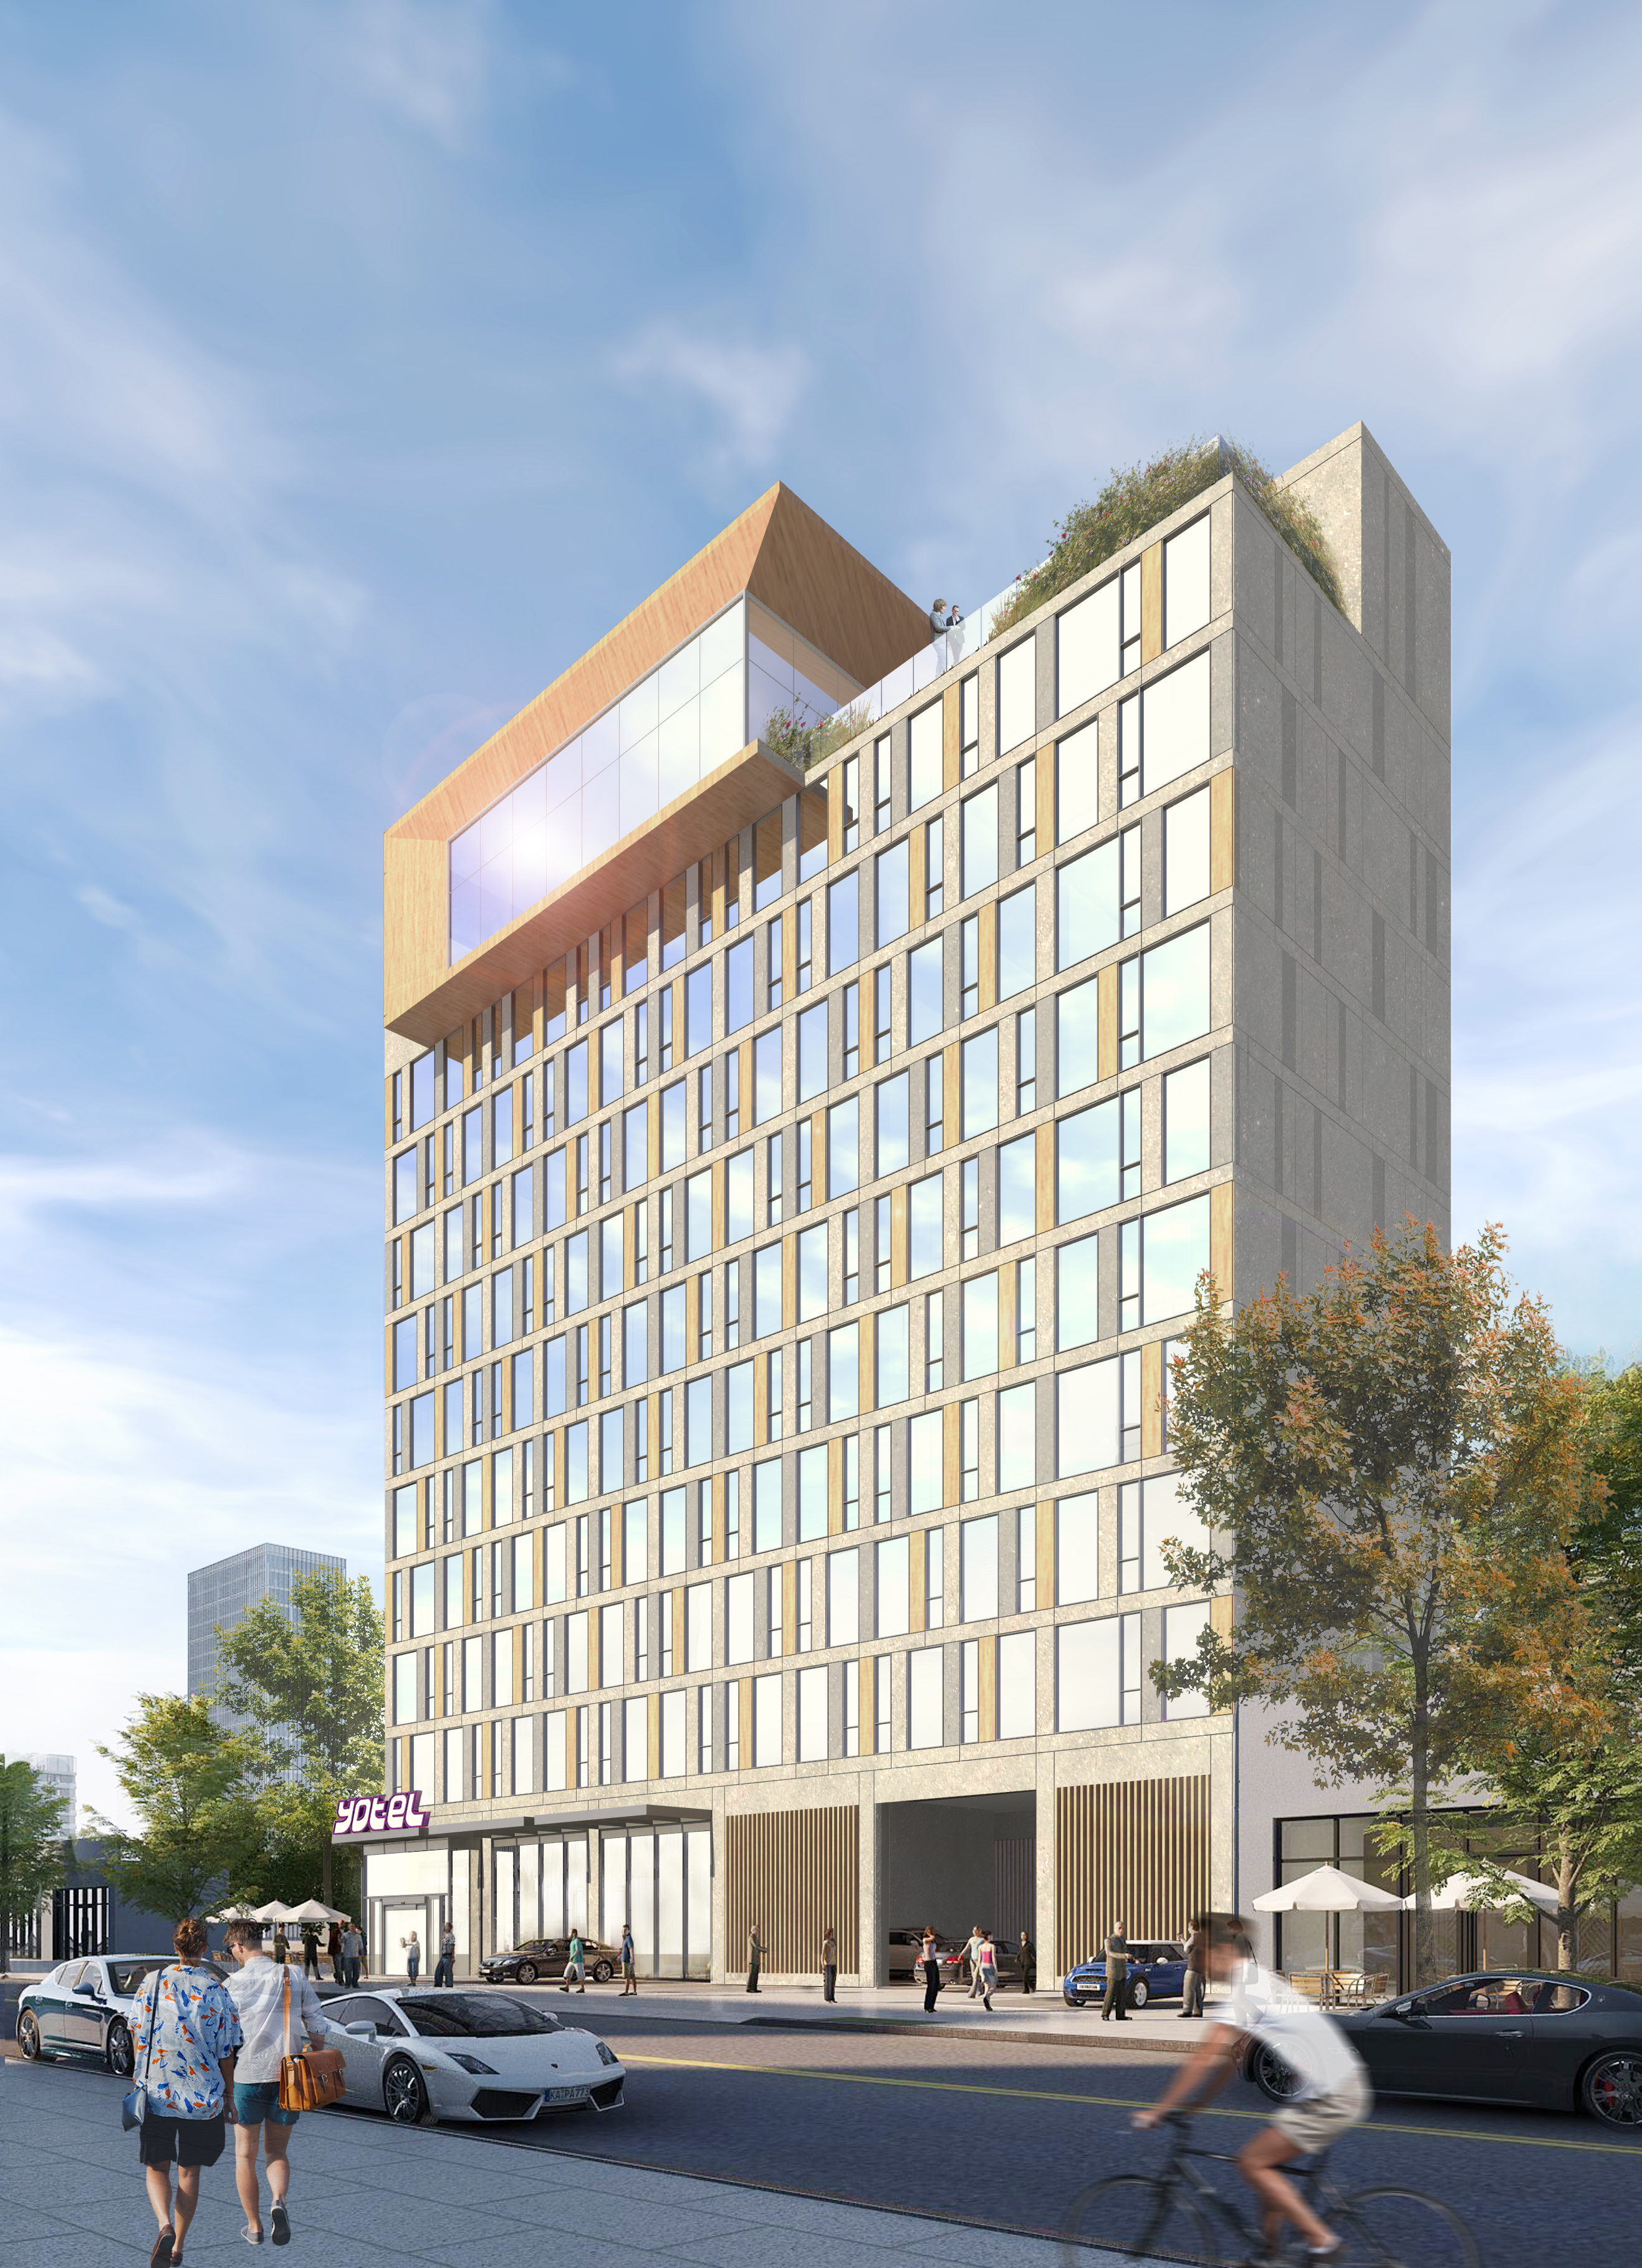 Yotel Long Island City marks the groups eighth hotel under development or operation in the US and its second in New Yor